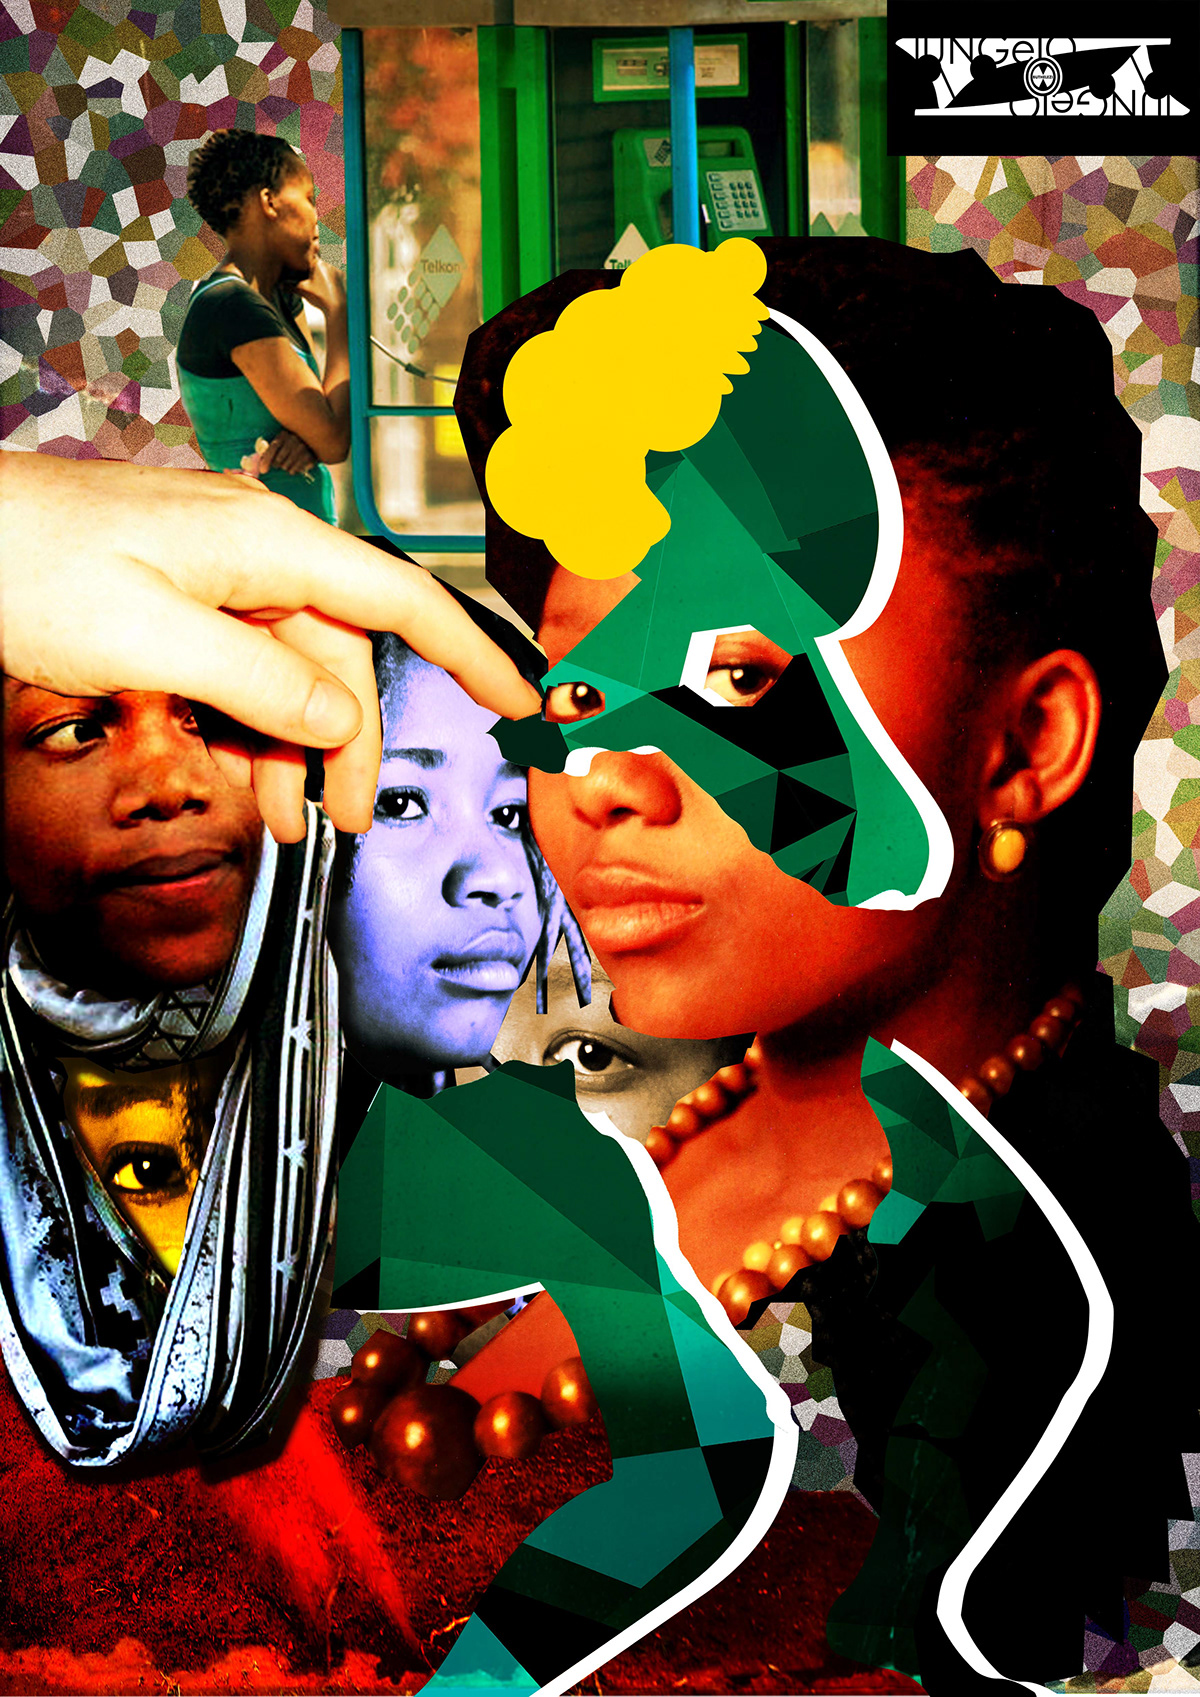 Love. unity. together cubism Picasso africa Documentary  Urban metropolis